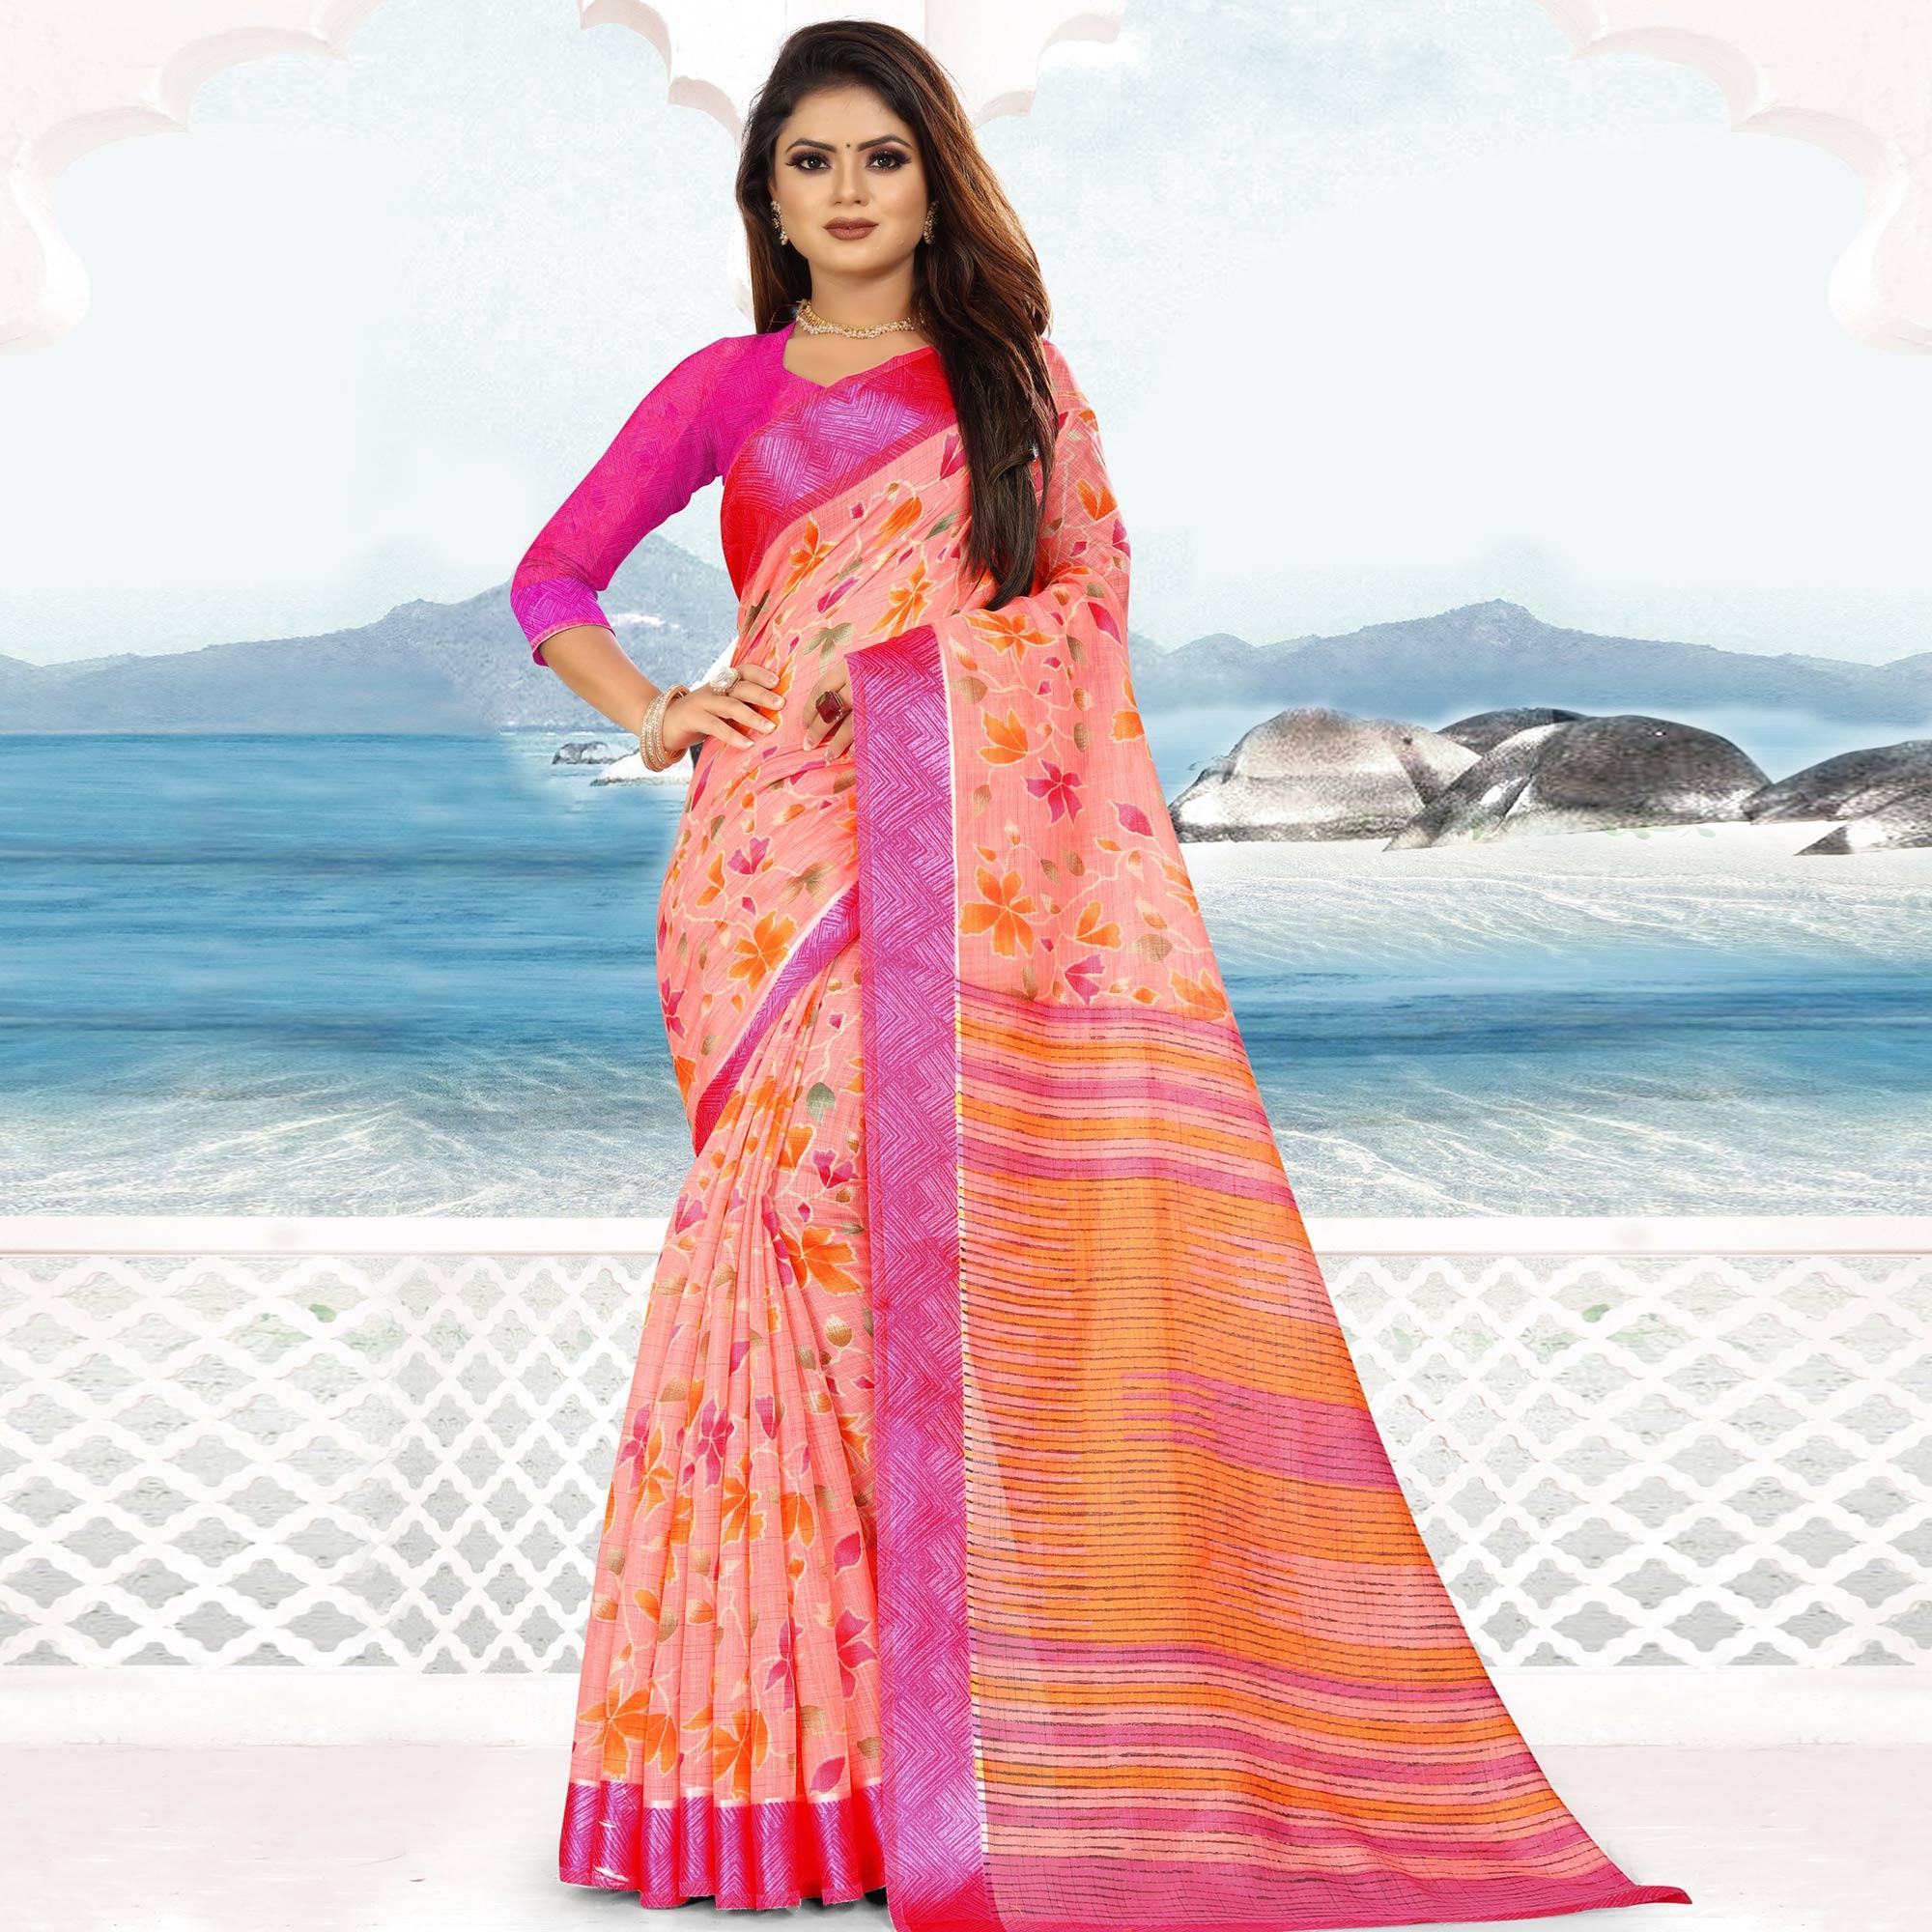 Alluring Pink Colored Casual Wear Floral Printed Linen Saree With Satin Patta Border - Peachmode